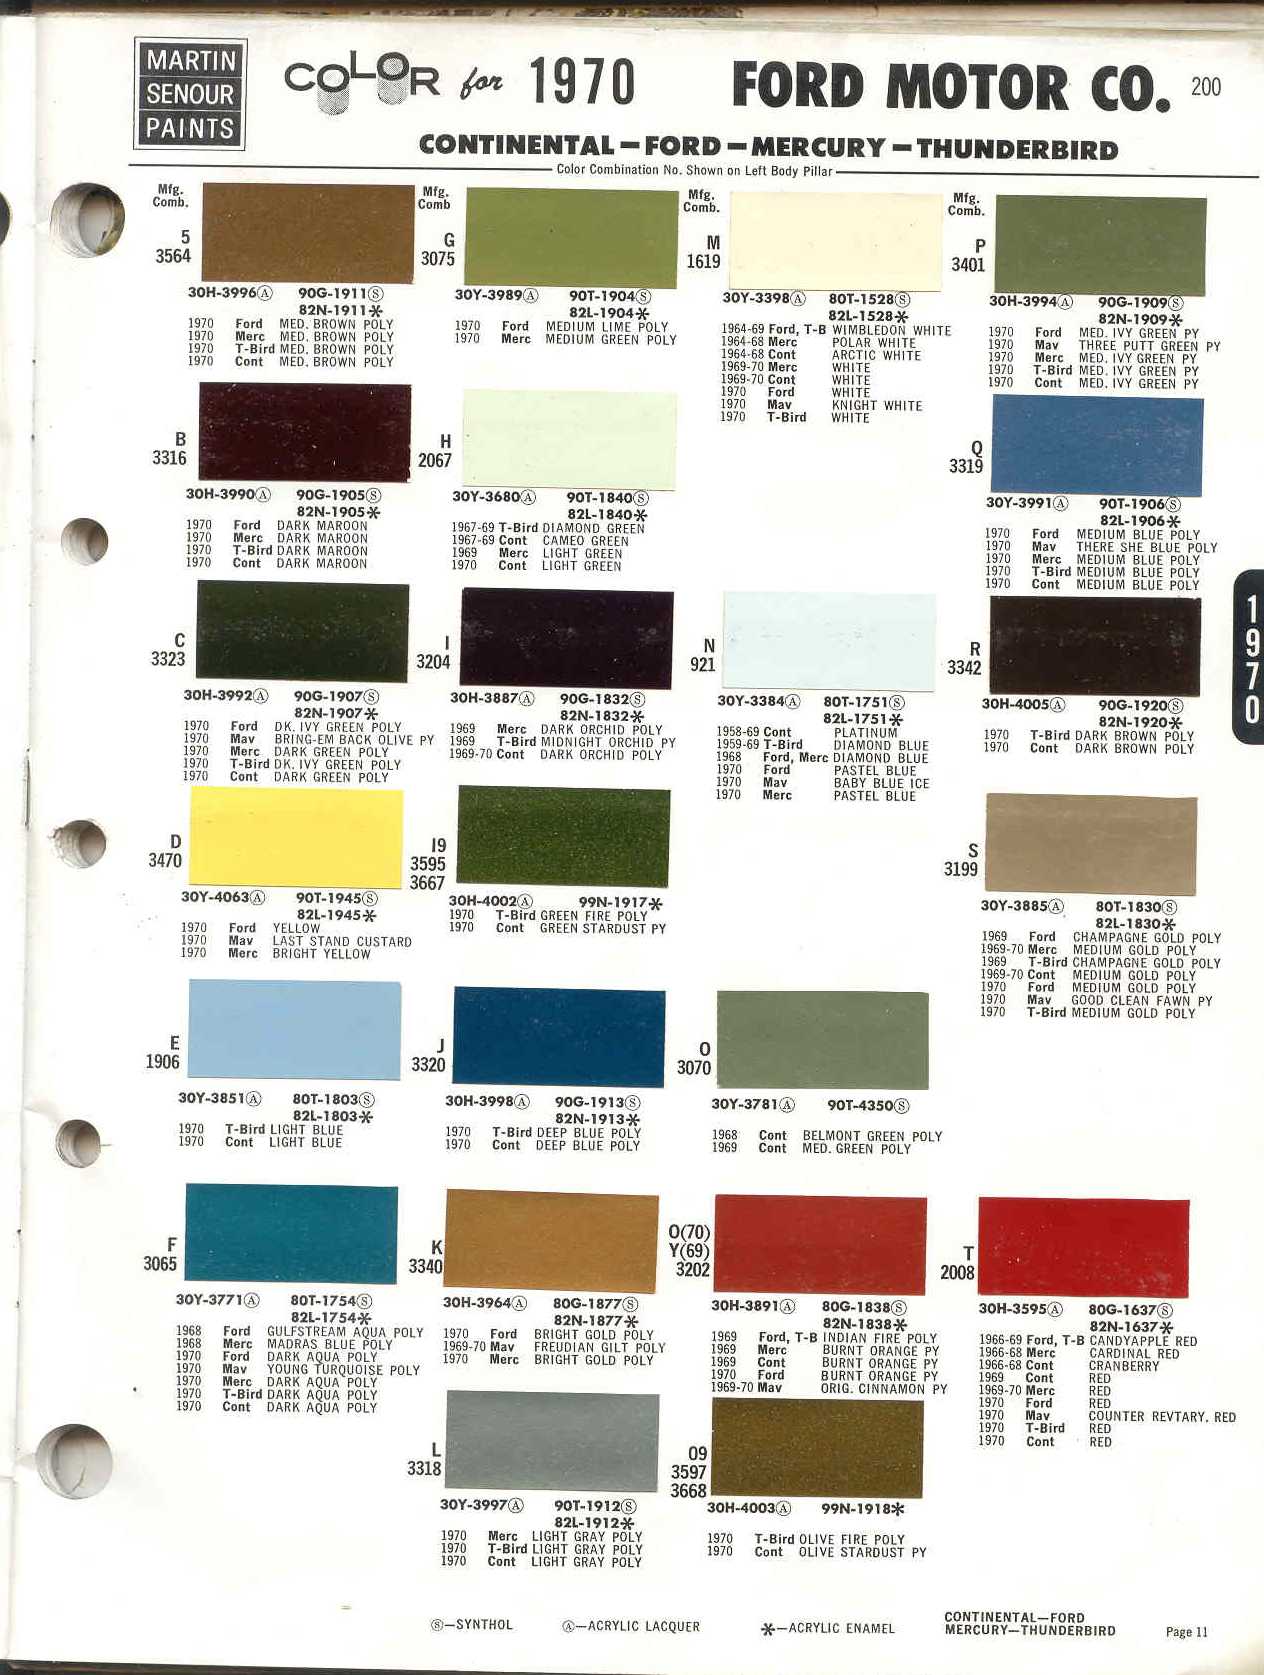 1970 Ford torino paint colors #8